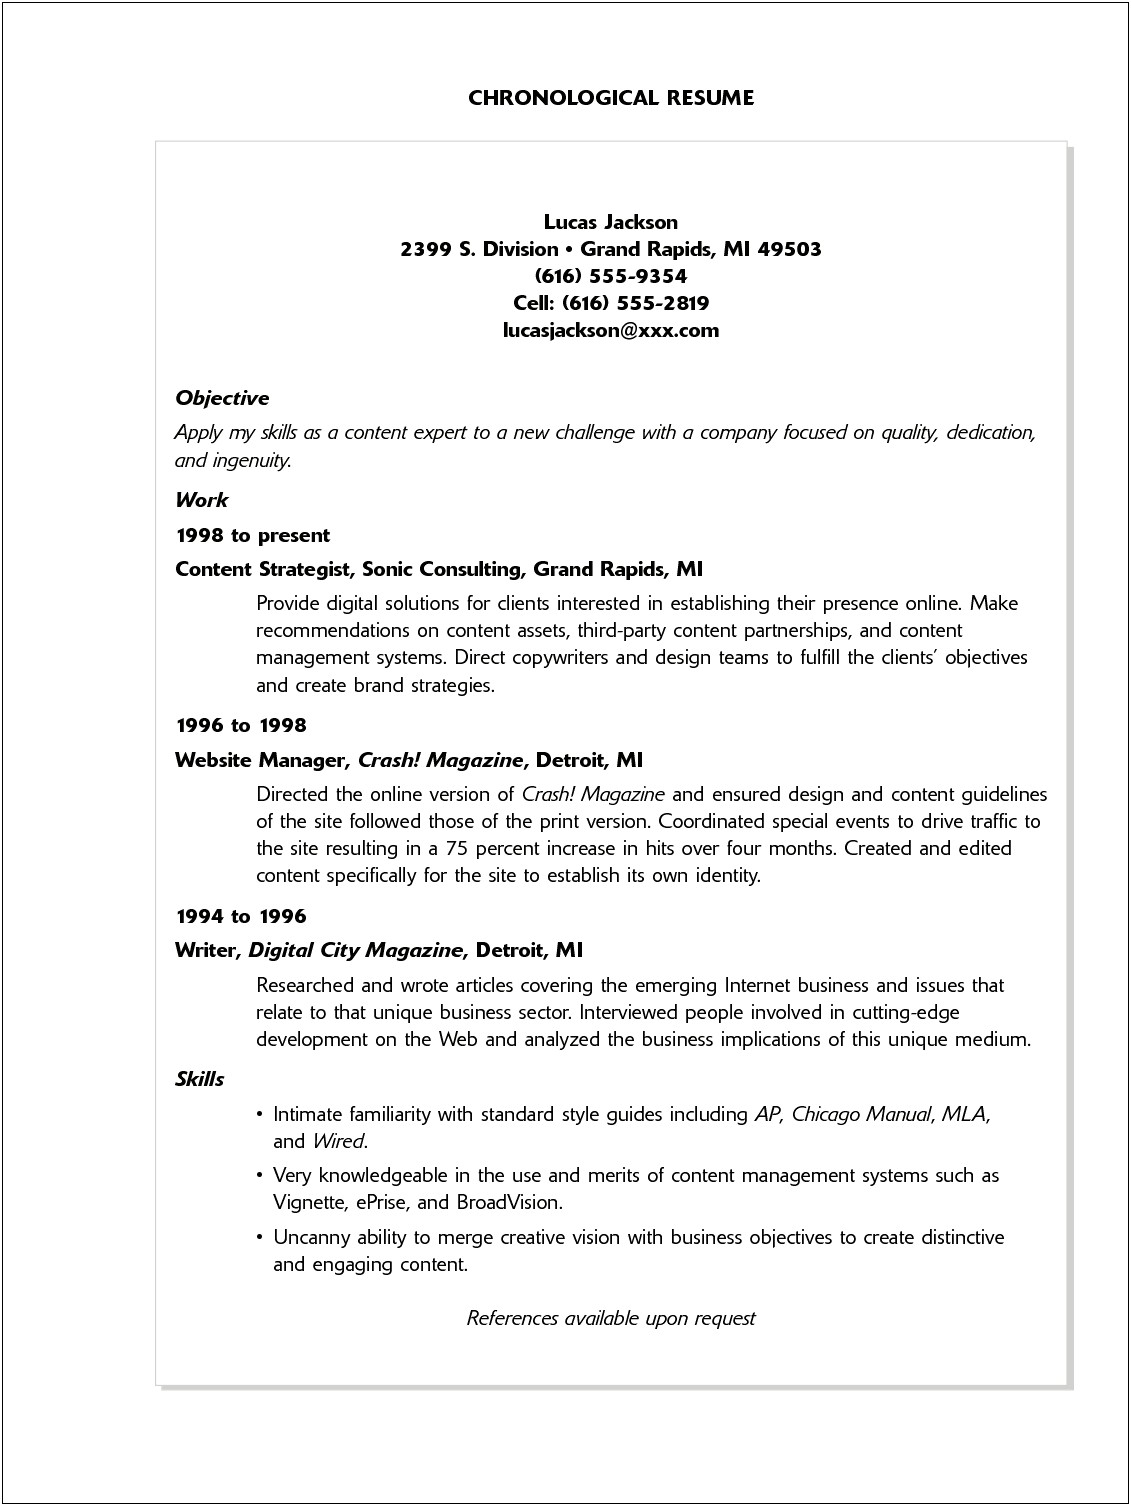 Sample Computer Skills Section Of Resume